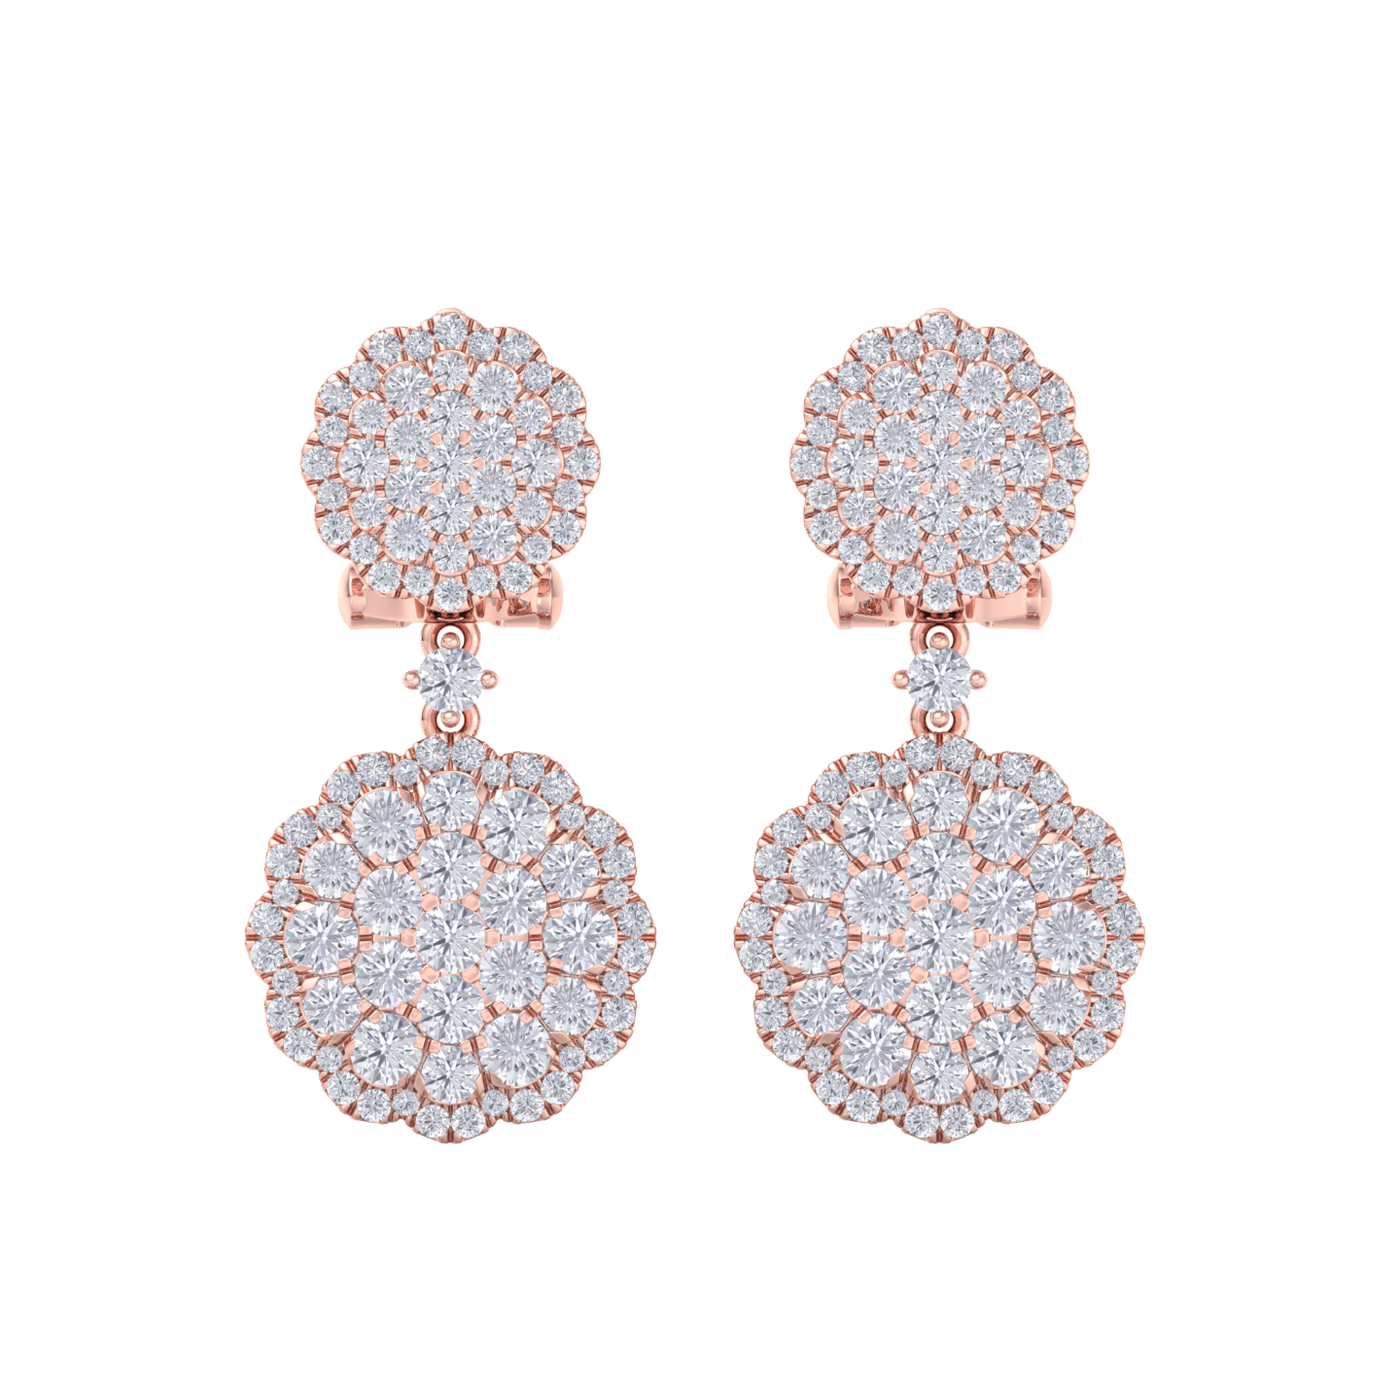 Drop earrings in yellow gold with white diamonds of 2.52 ct in weight